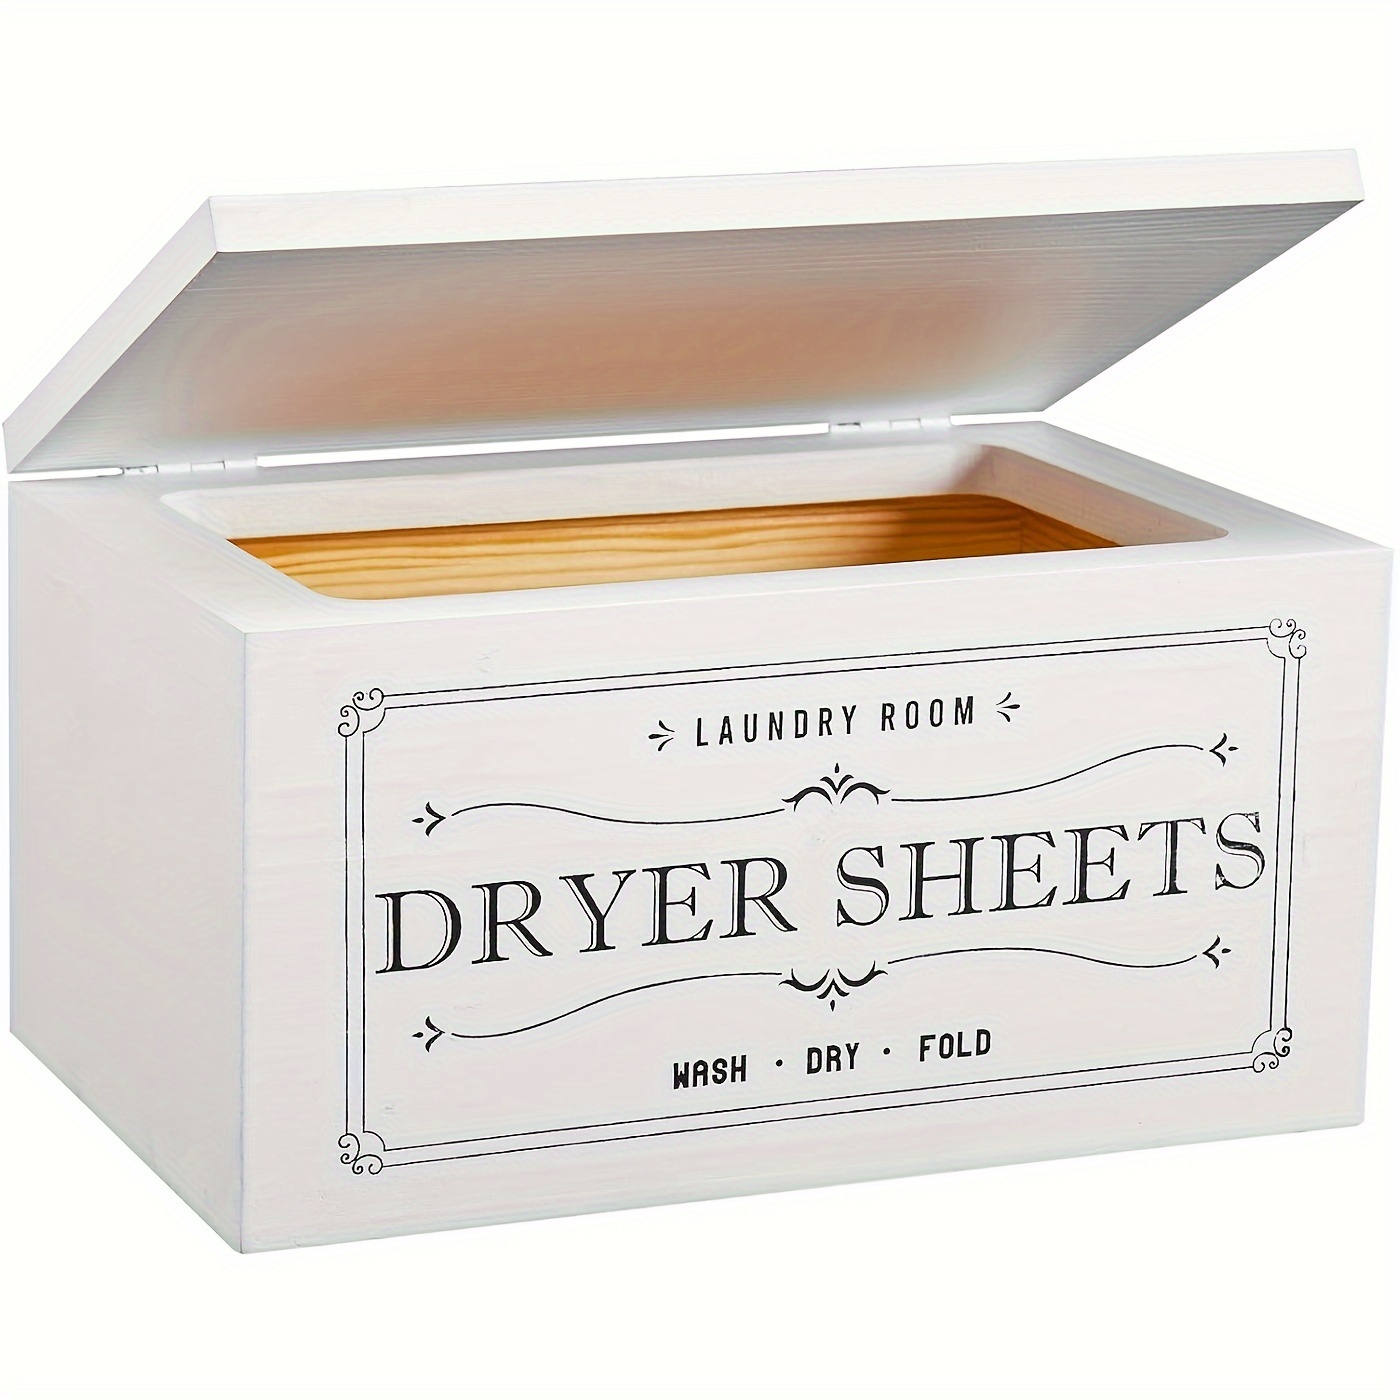 

1pc Dryer Sheet Storage Box With Cover, Laundry Sheet Container, Farmhouse Dryer Sheet Dispenser, Reusable Dryer Sheet Basket, Dryer Sheet Bin For Fabric Softener, Laundry Room Accessories